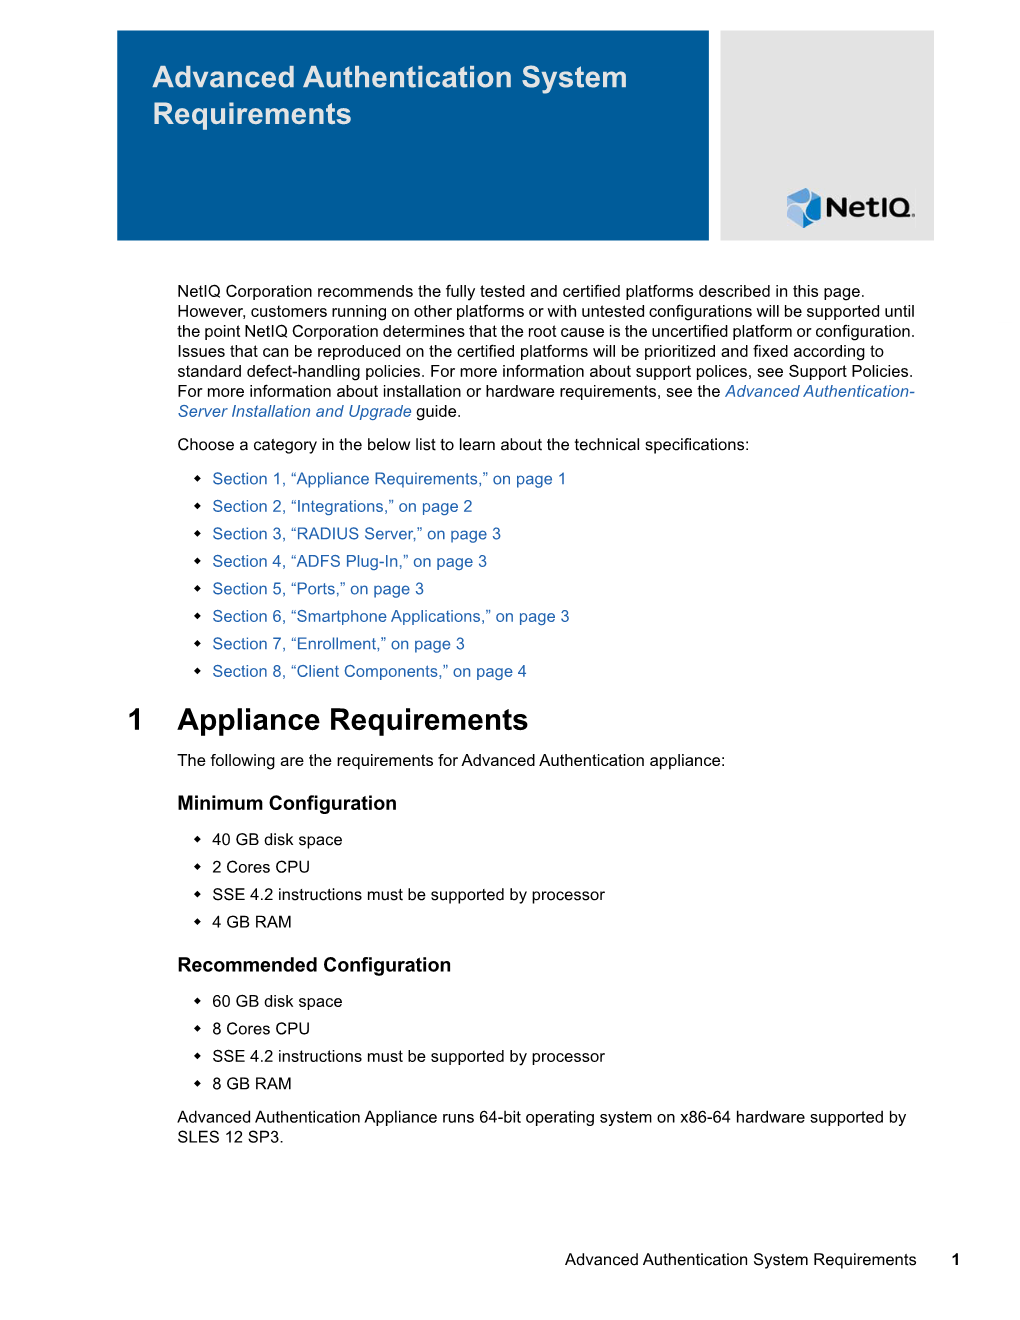 Advanced Authentication System Requirements